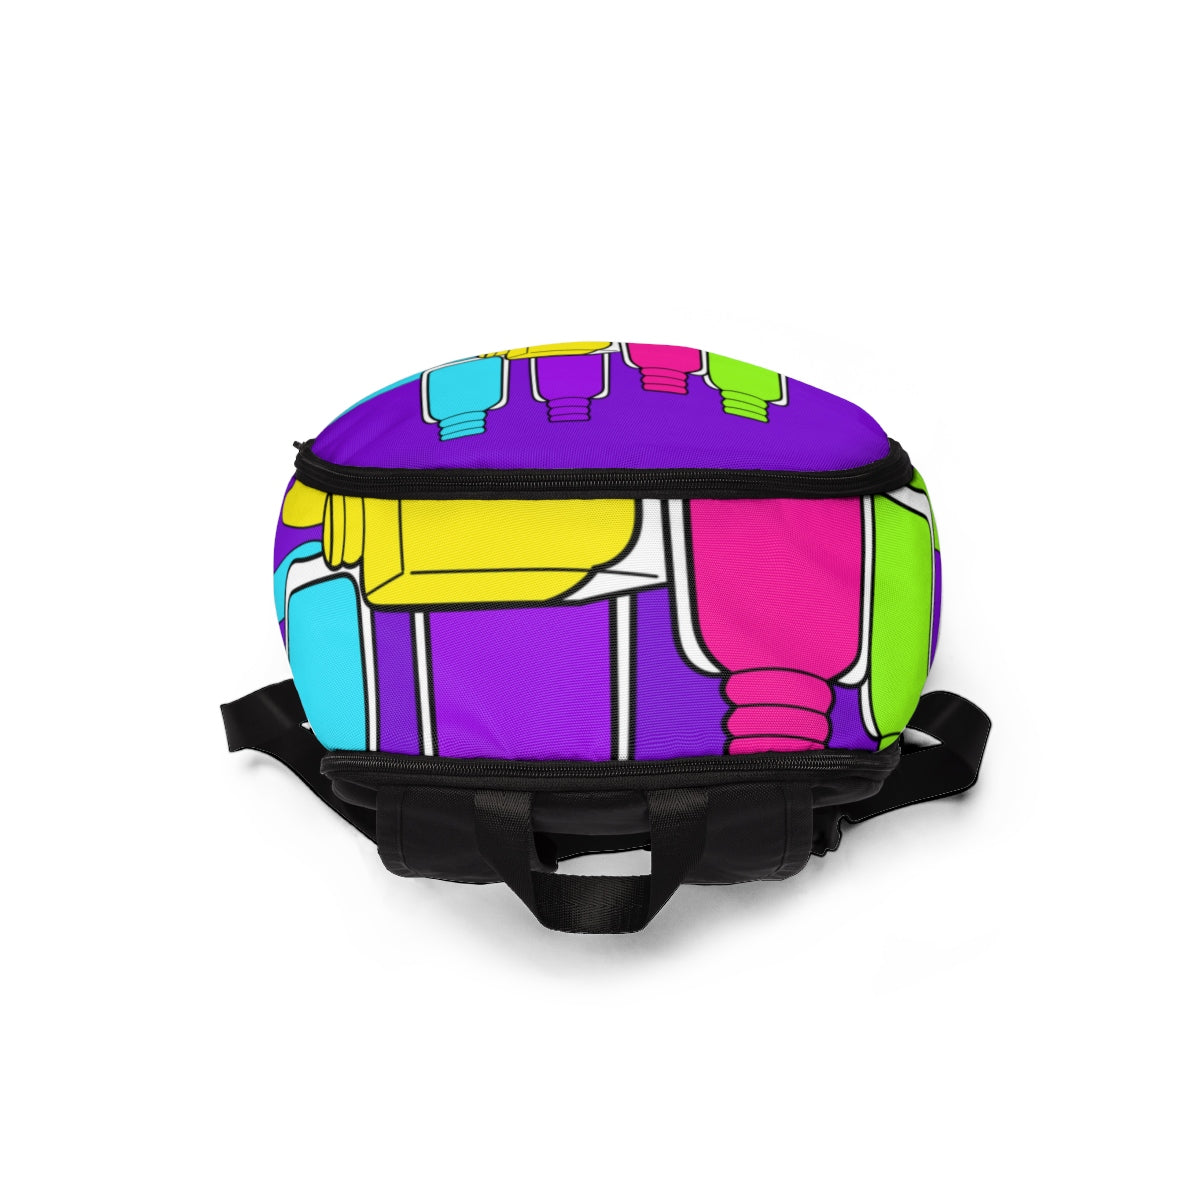 NAILED IT NEON PURPLE BACK PACK